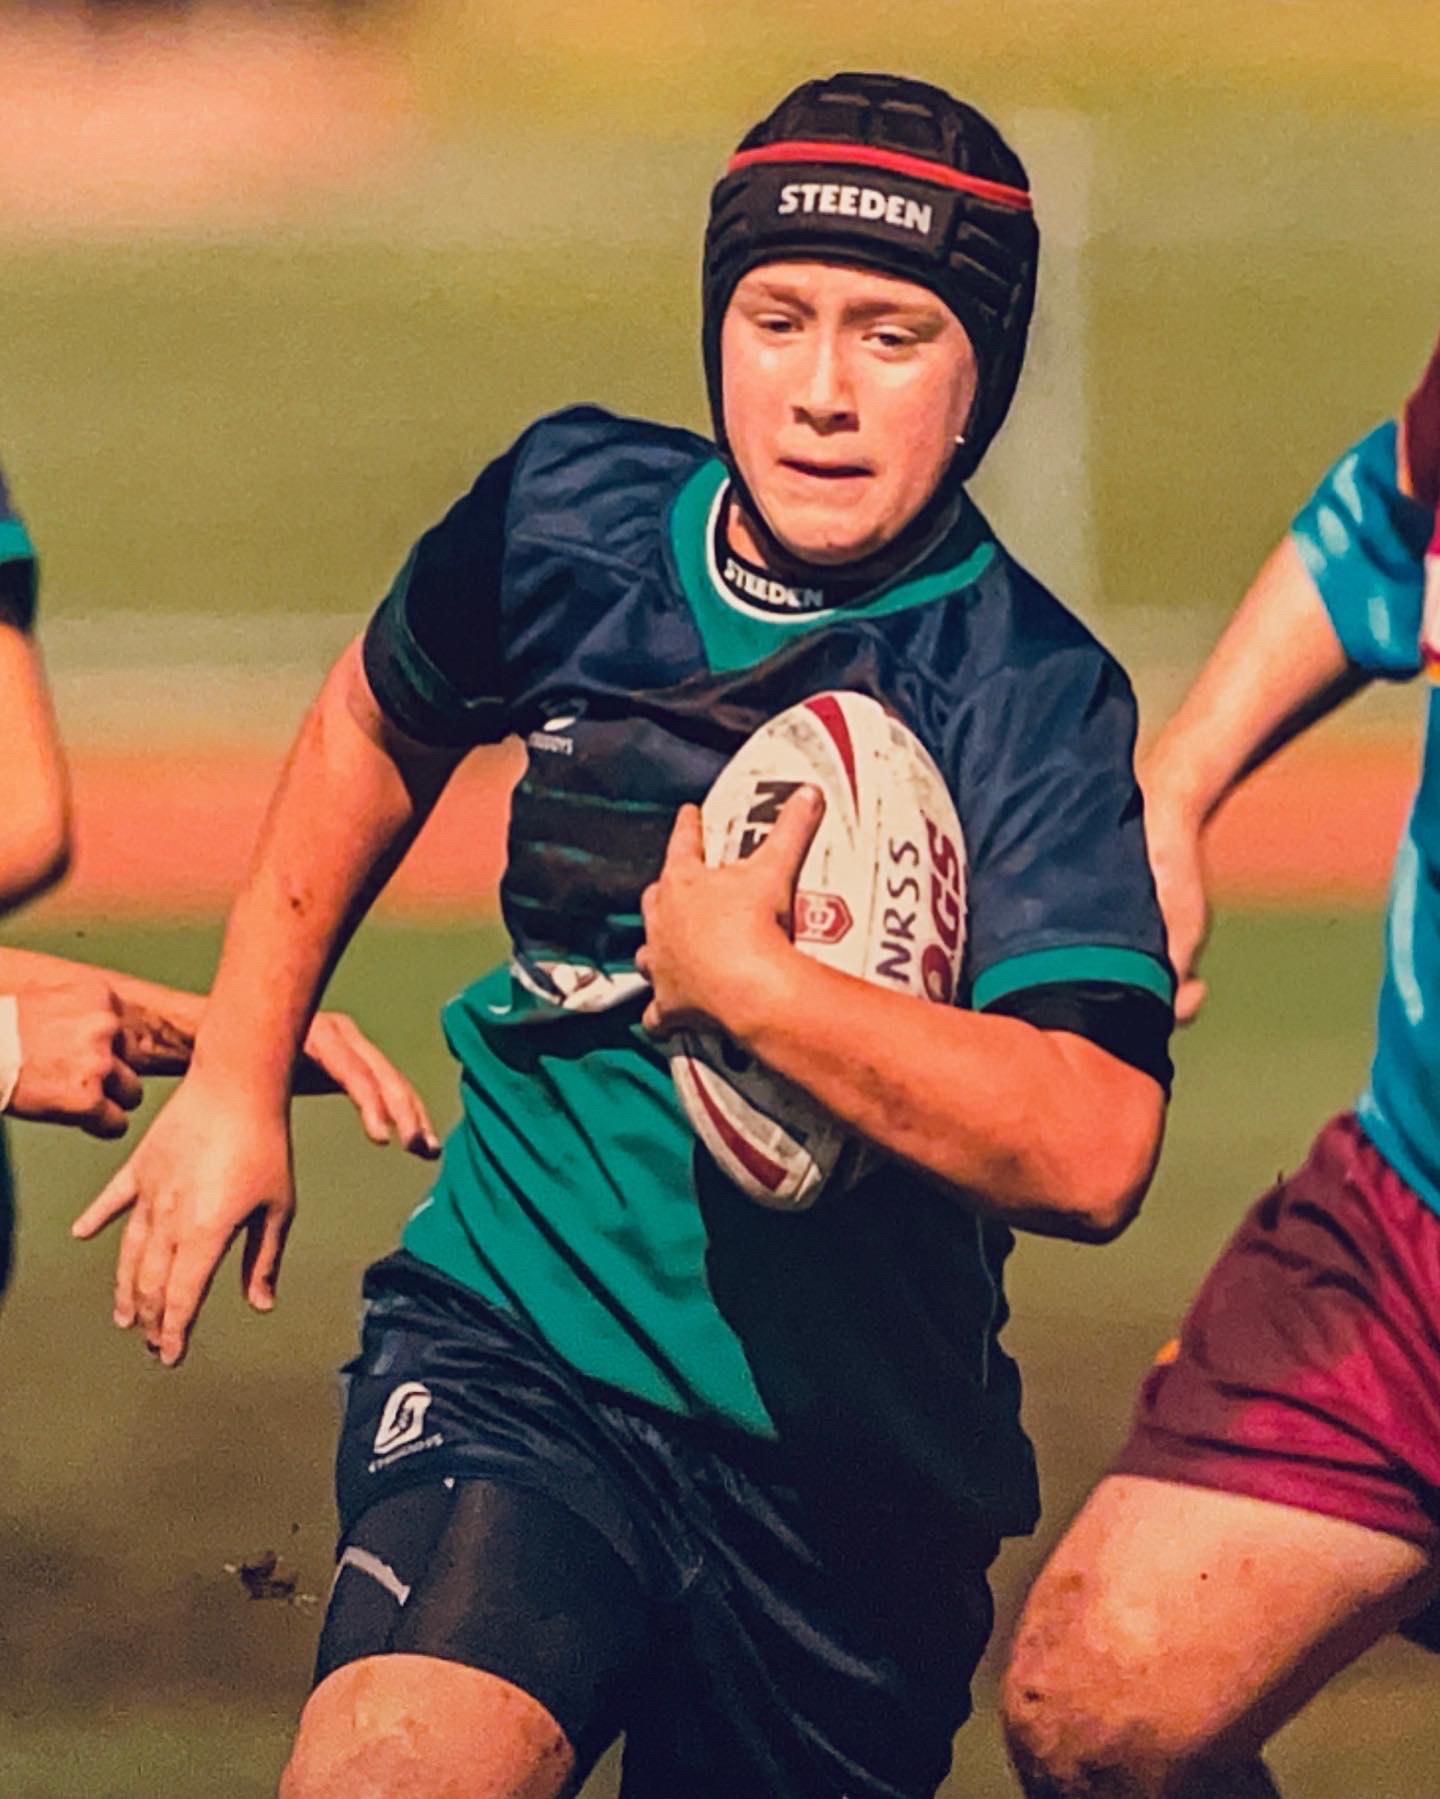 Young rugby player running with ball